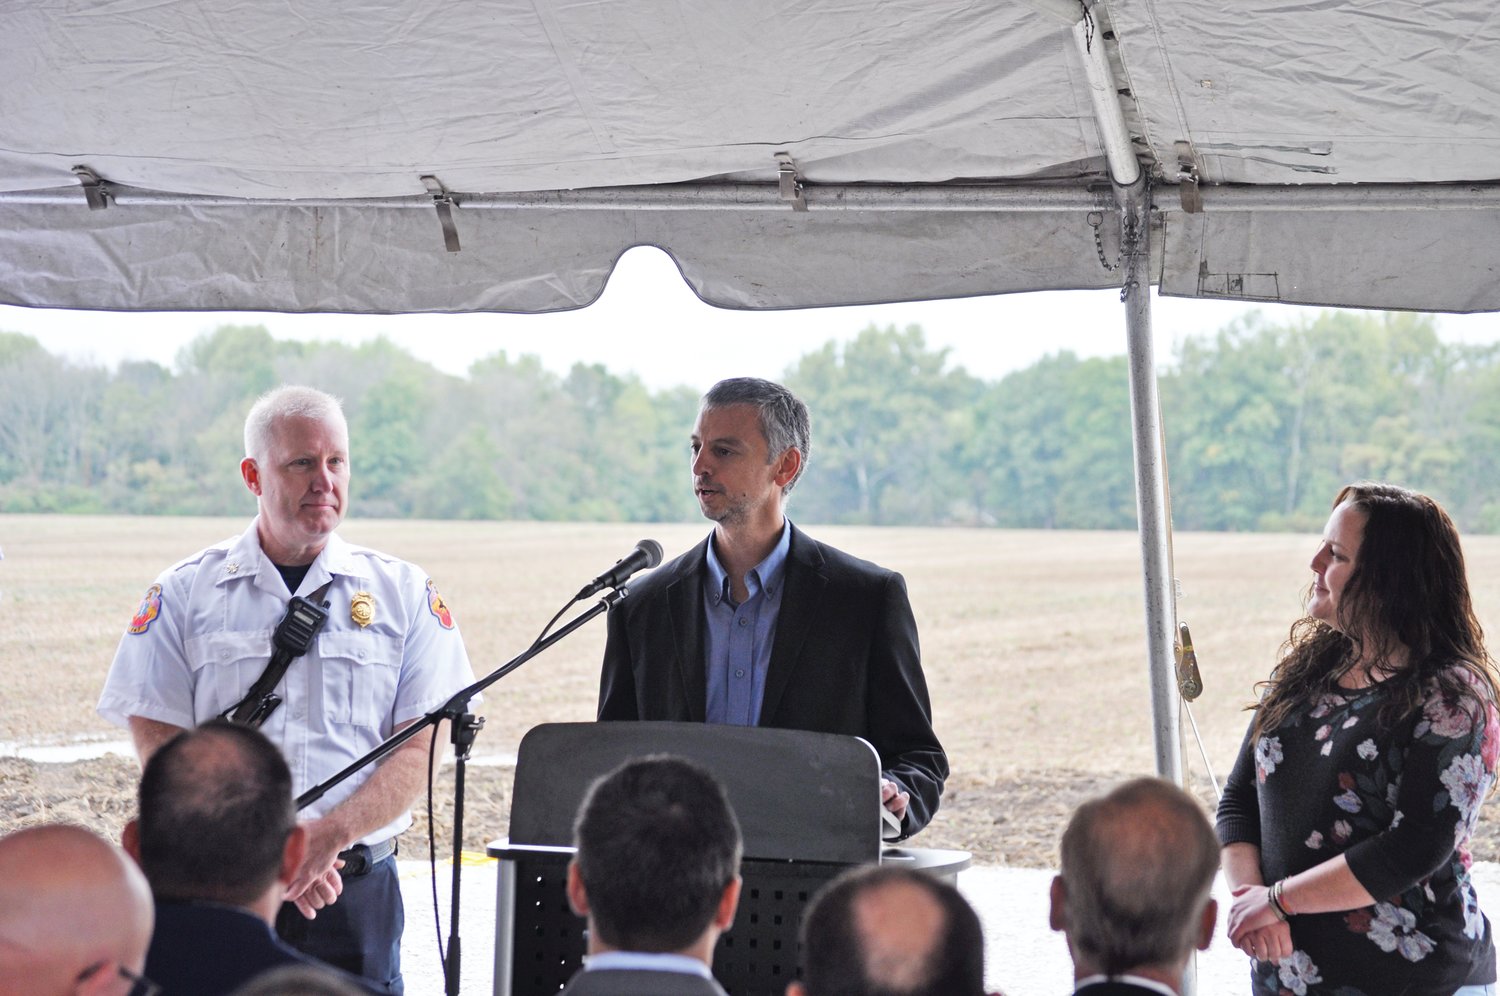 Alex Lupi, center, director of operations for Tempur Sealy International, presents donations to the Crawfordsville Fire Department and women’s addictions residential facility Through the Gate at a groundbreaking ceremony for the Tempur Sealy plant on Thursday. Representing the fire department is Chief Scott Busenbark and representing Through the Gate is founder Janet Covington.